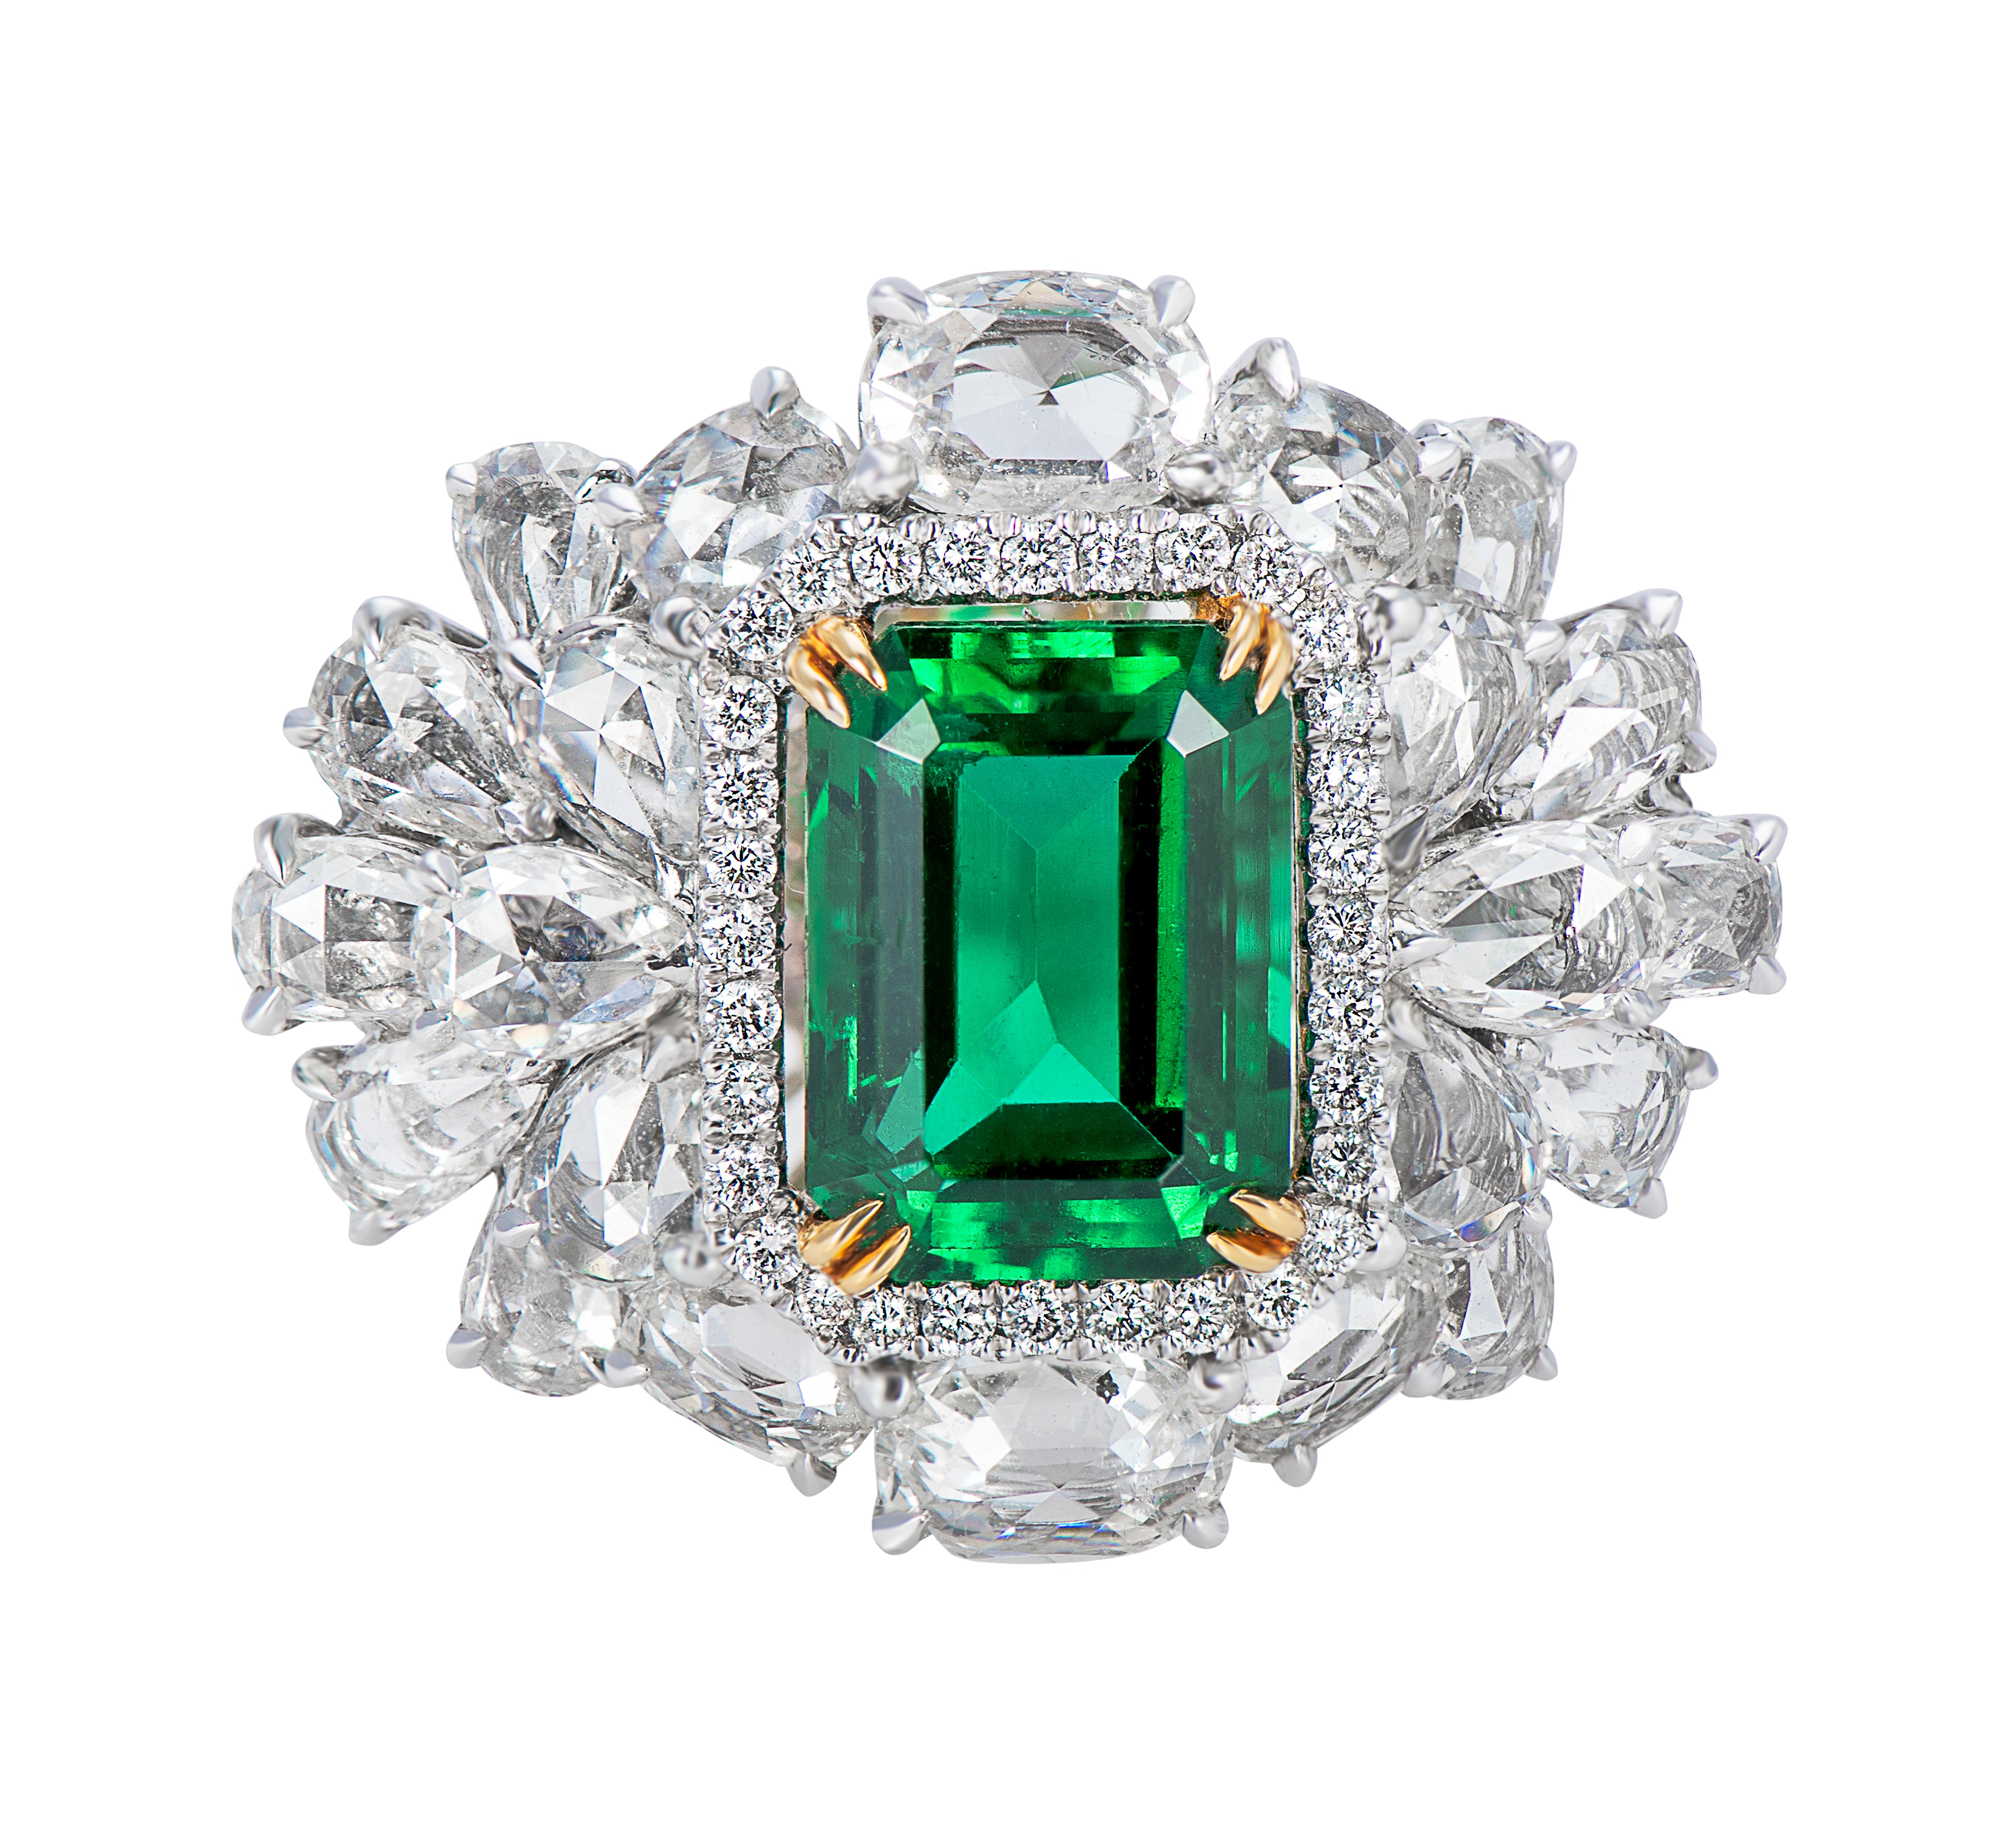 Platinum and 18 karat yellow gold Emerald cocktail ring part of Laviere's Viridian collection. The ring is set with a 2.93 carat GRS certified octagon cut Emerald, surrounded by 3.5 carat of pear, oval, and brilliant round diamonds.
Gross Weight of